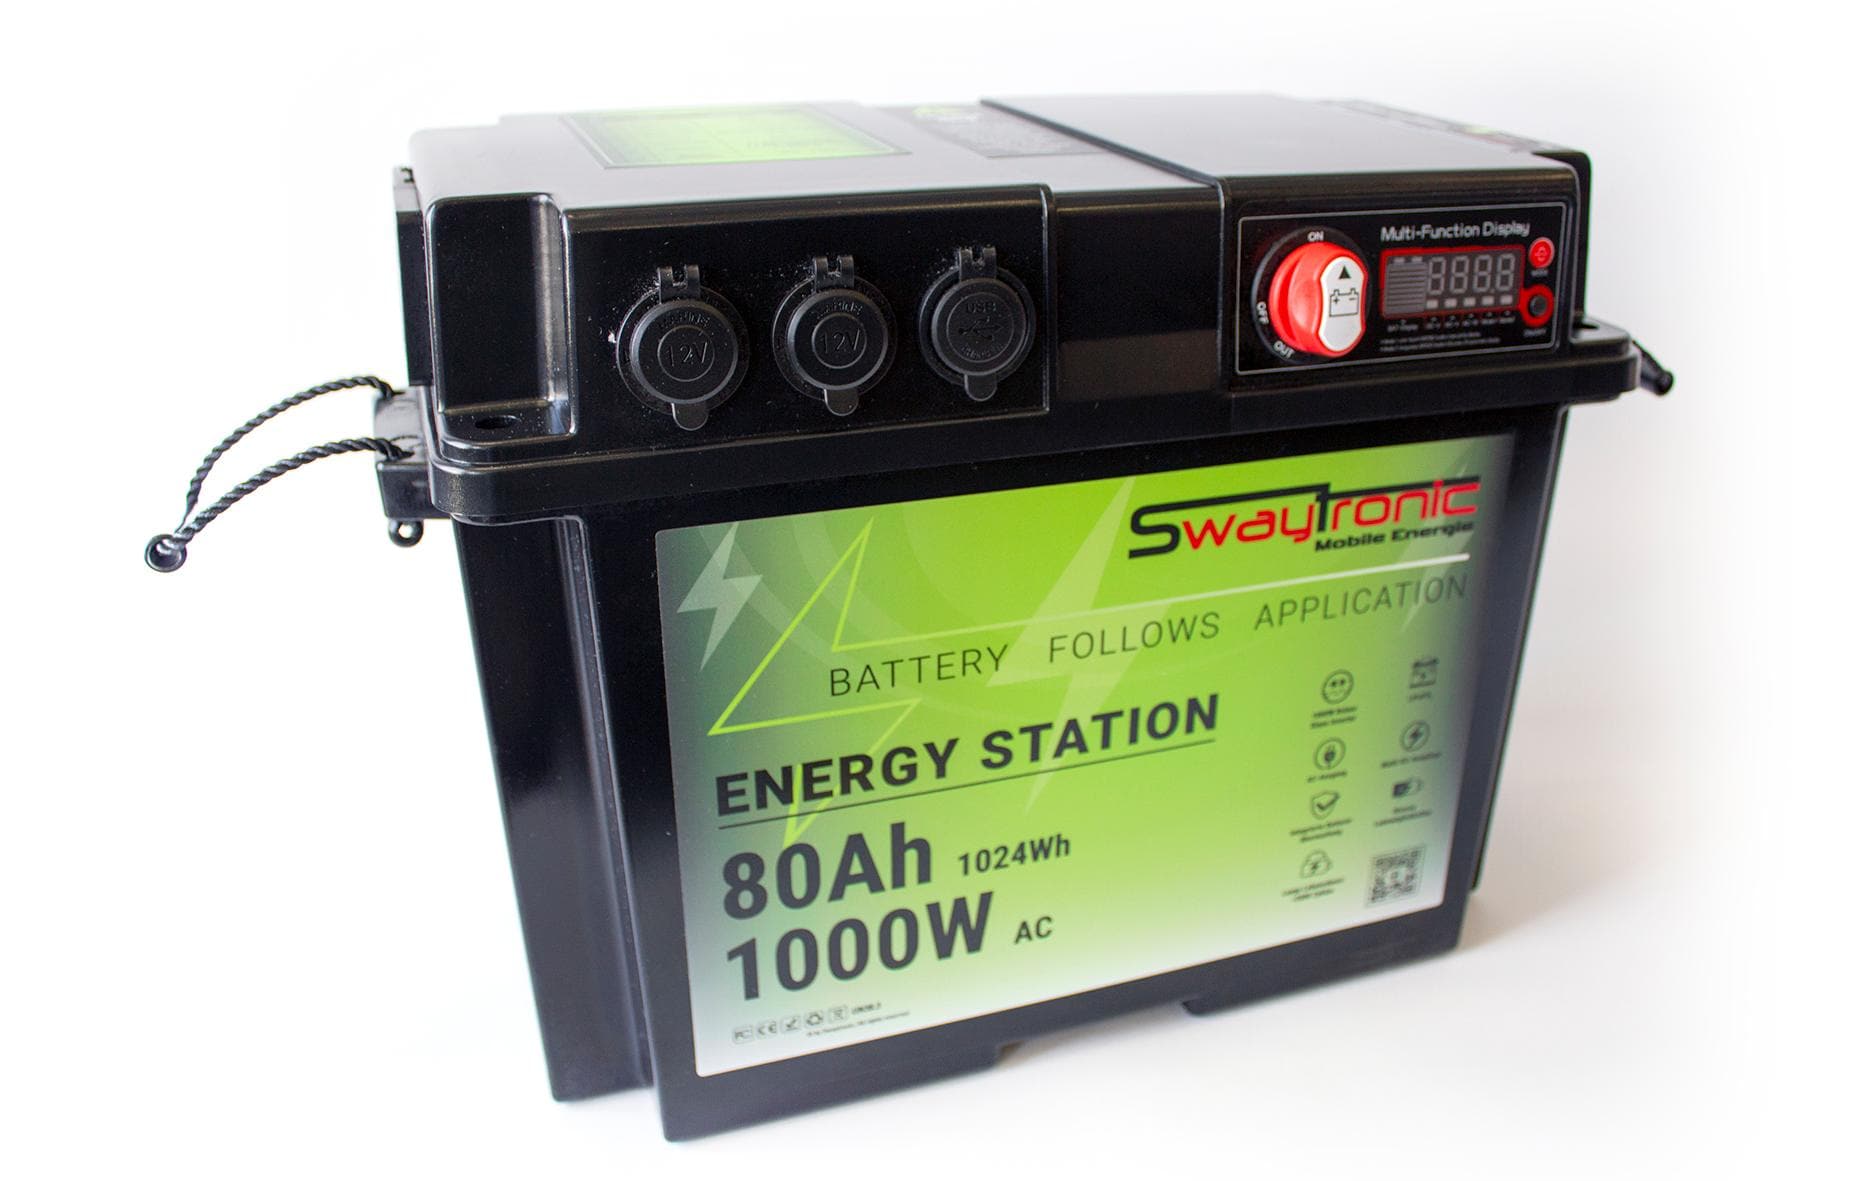 Swaytronic Power Station 1024 Wh